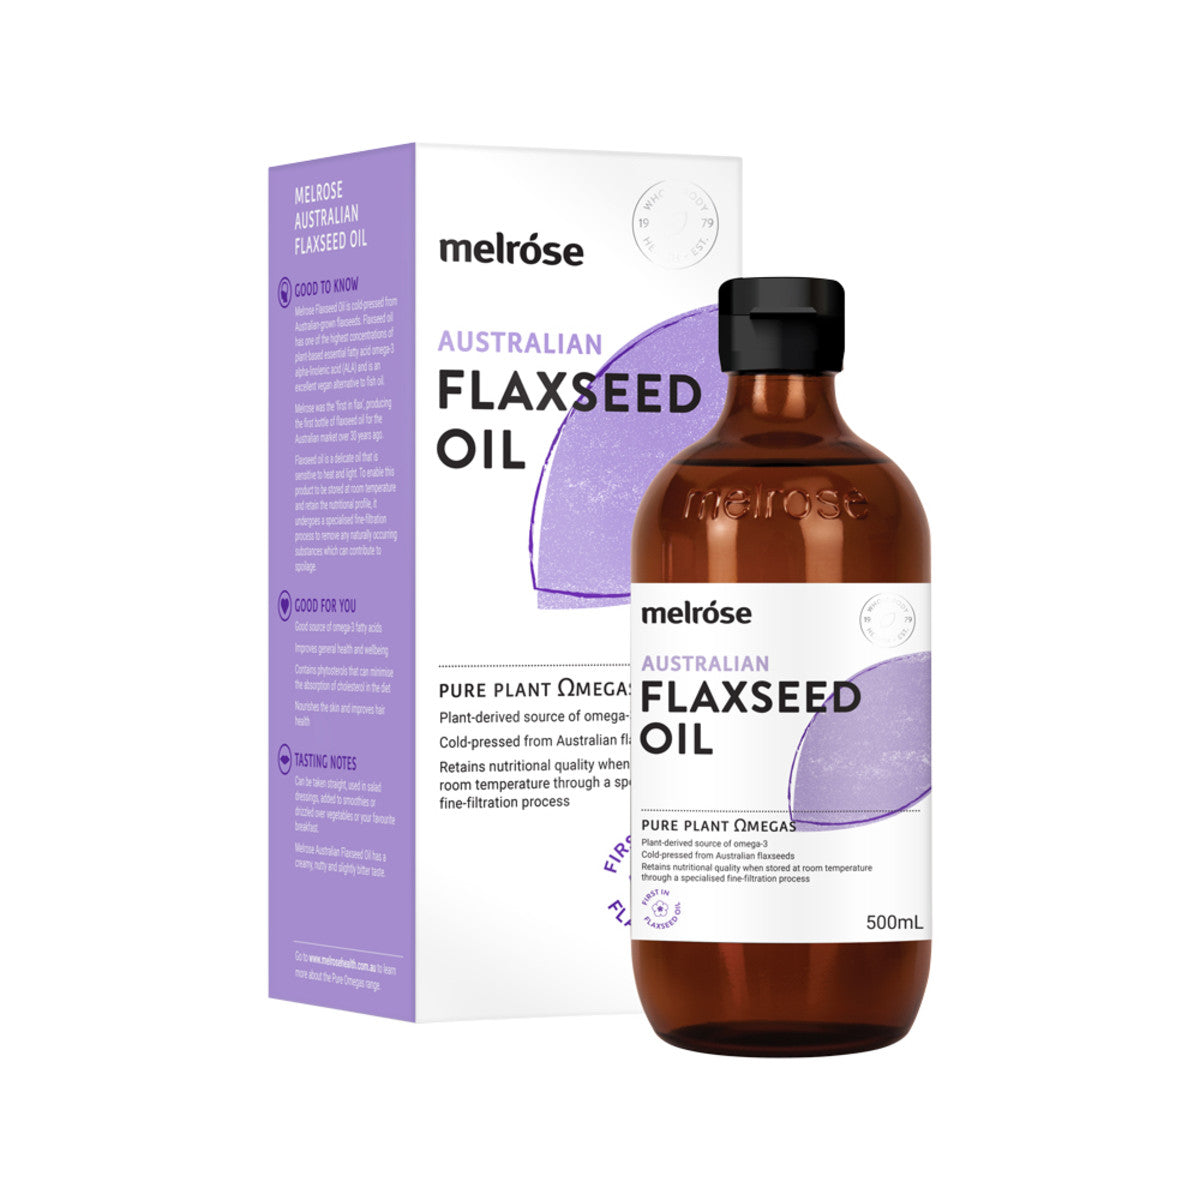 Melrose Australian Flaxseed Oil 500ml-The Living Co.